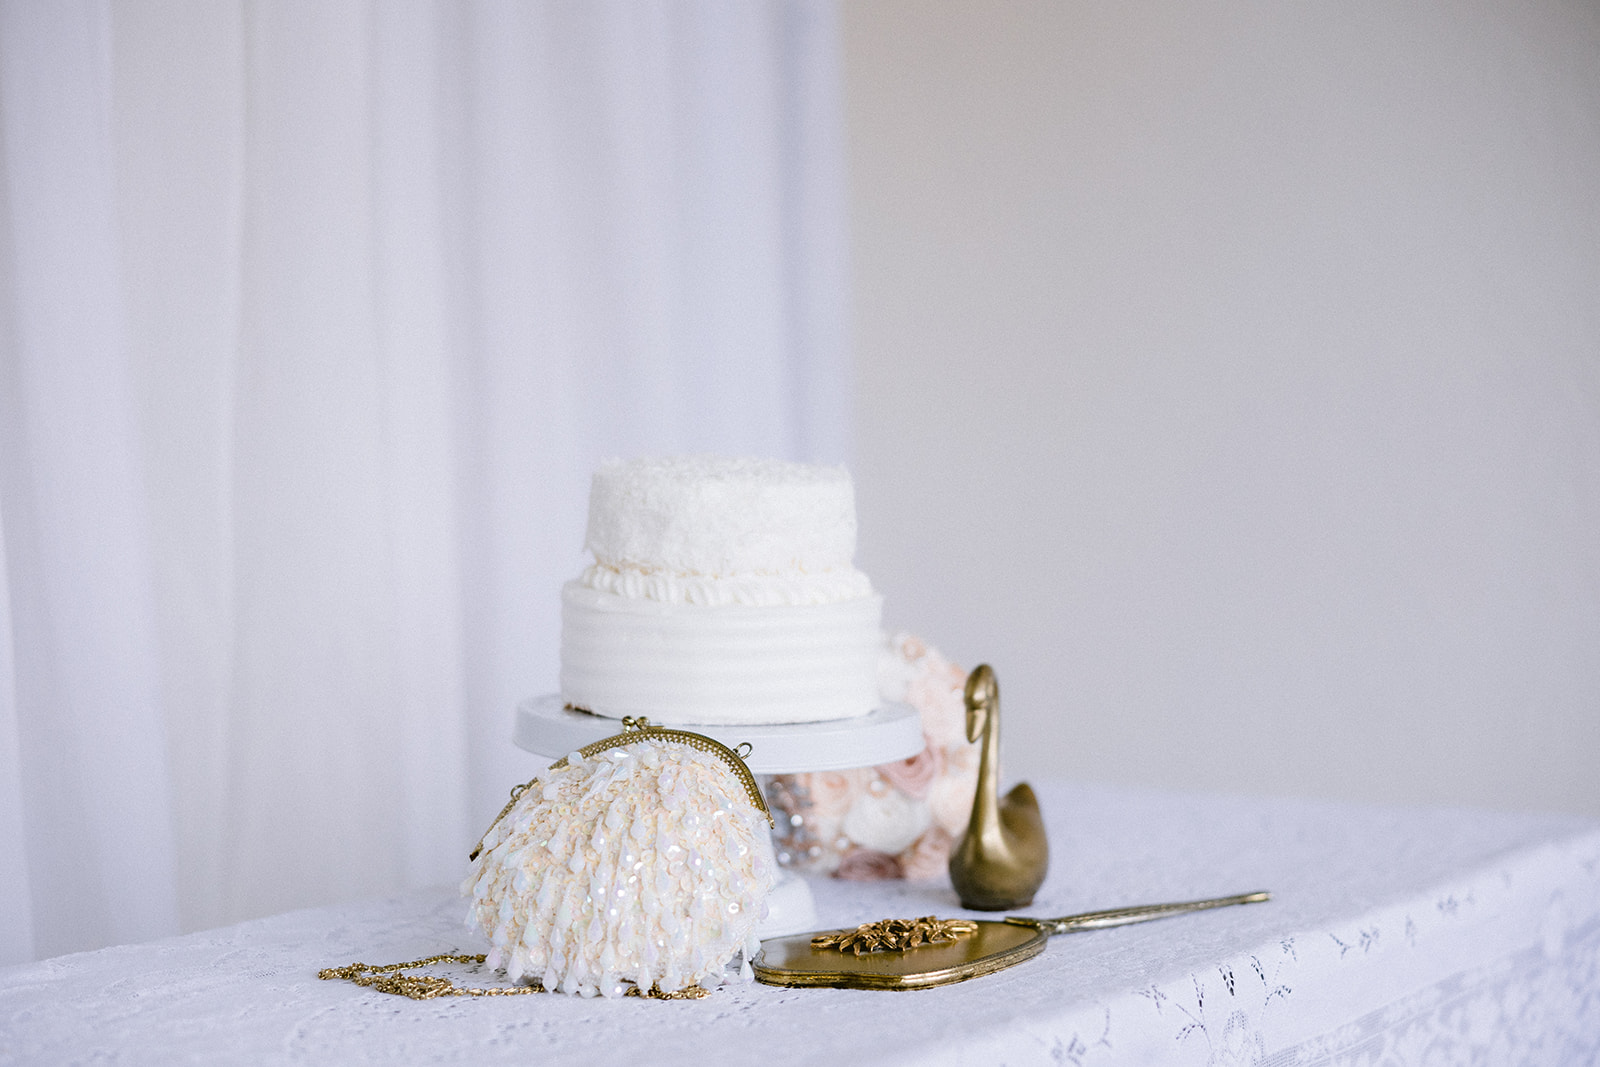 A cake and vintage bridal details help tie this Swan Lake editorial together.